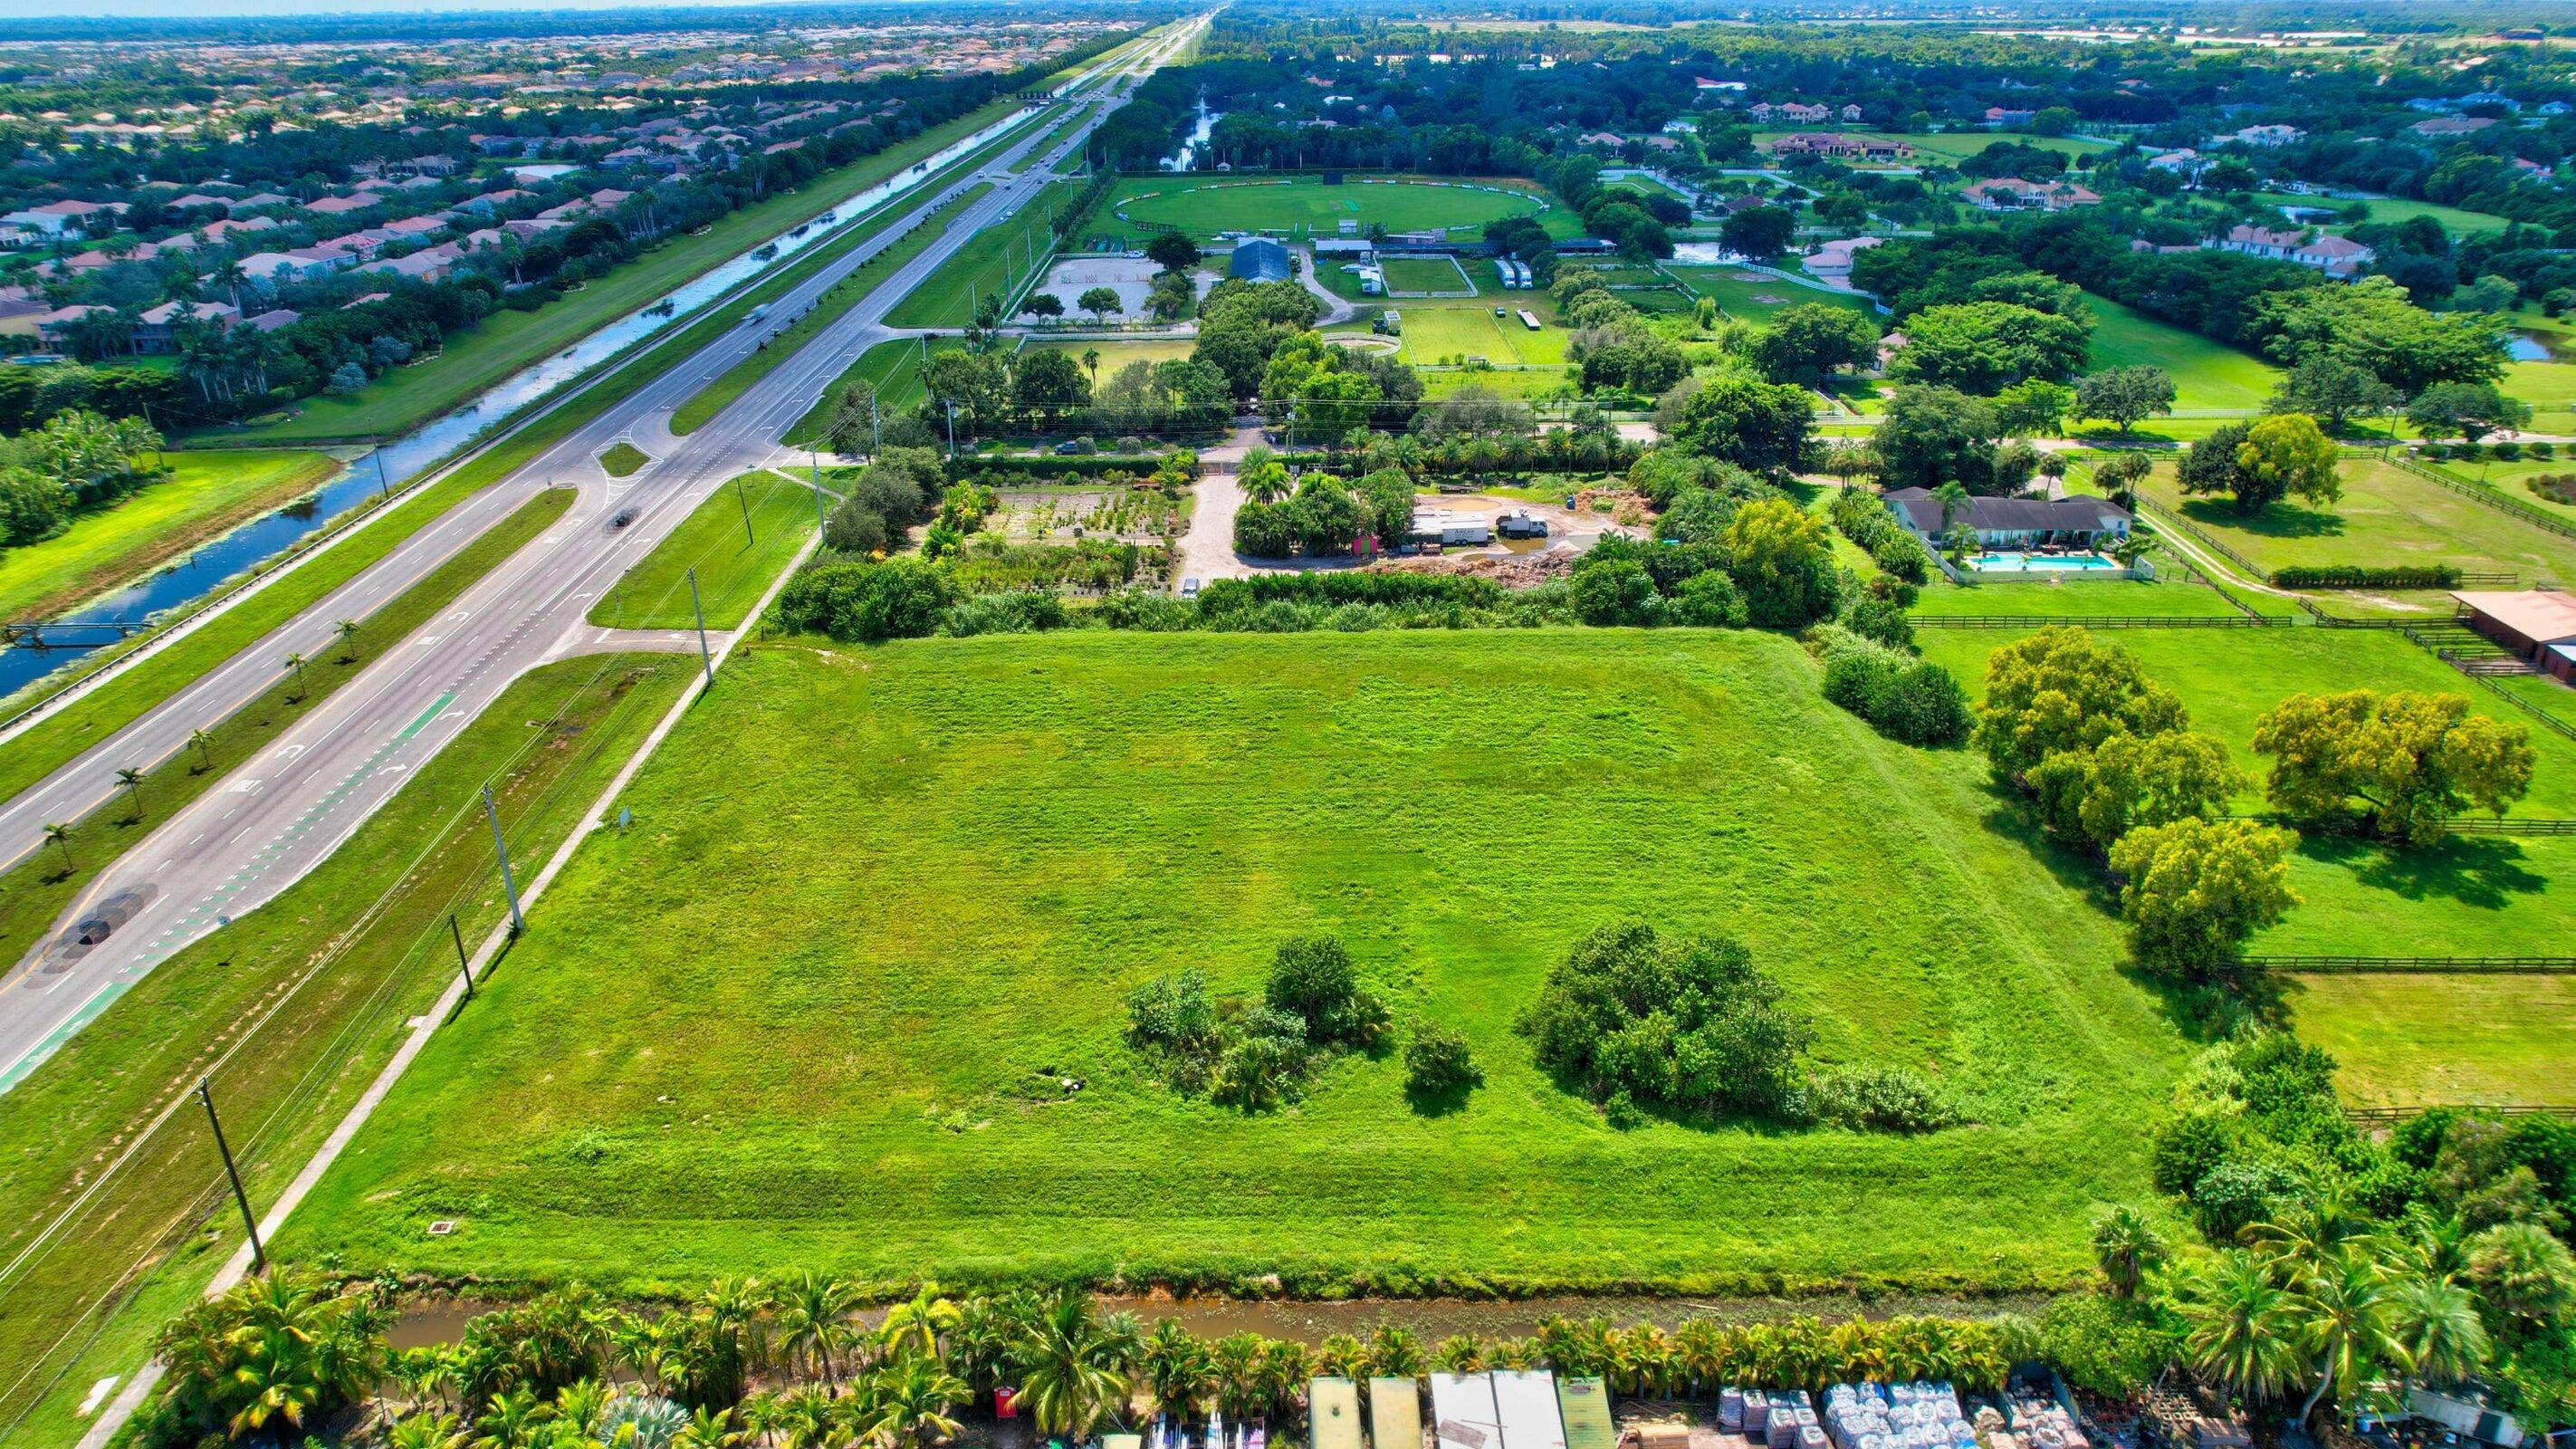 Two parcels of 6. 4 acres offer a unique combination of prime location, substantial acreage, and the prospect of rezoning for office development or medical.